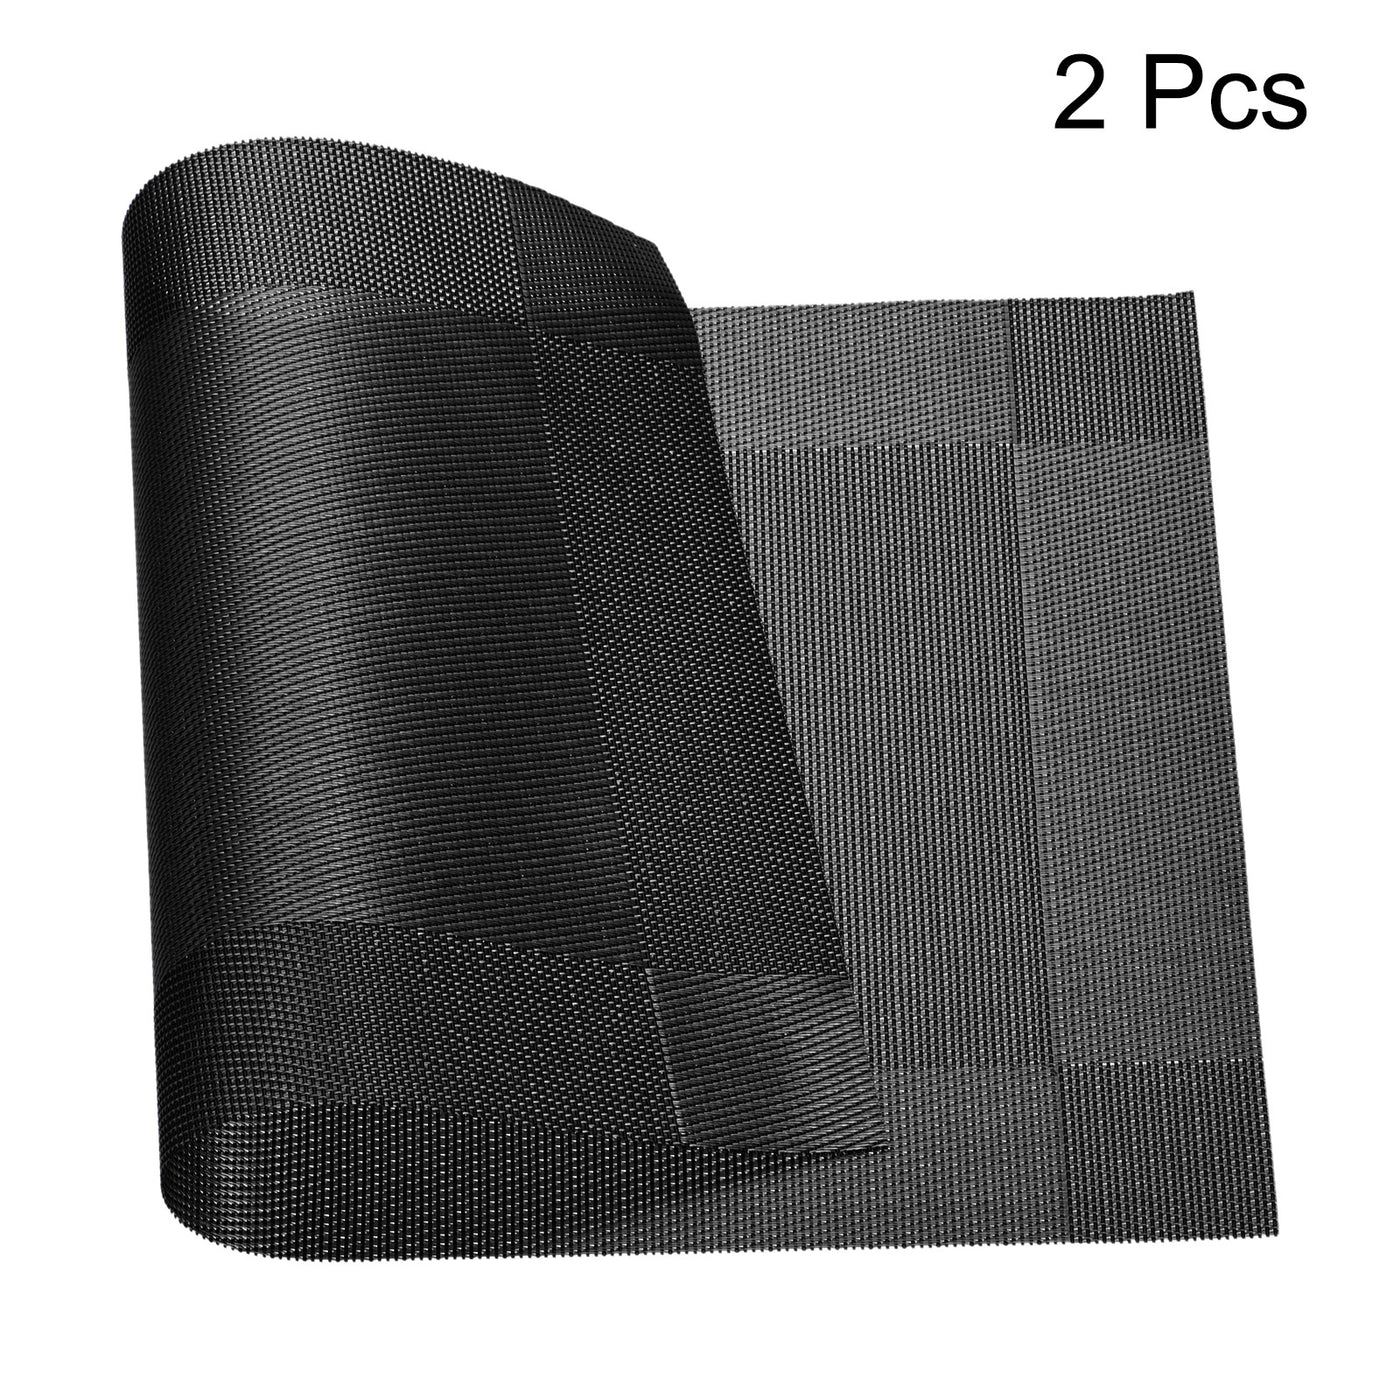 uxcell Uxcell Place Mats 450x300mm 2pcs PVC Table Washable Woven Placemat, Black Gray